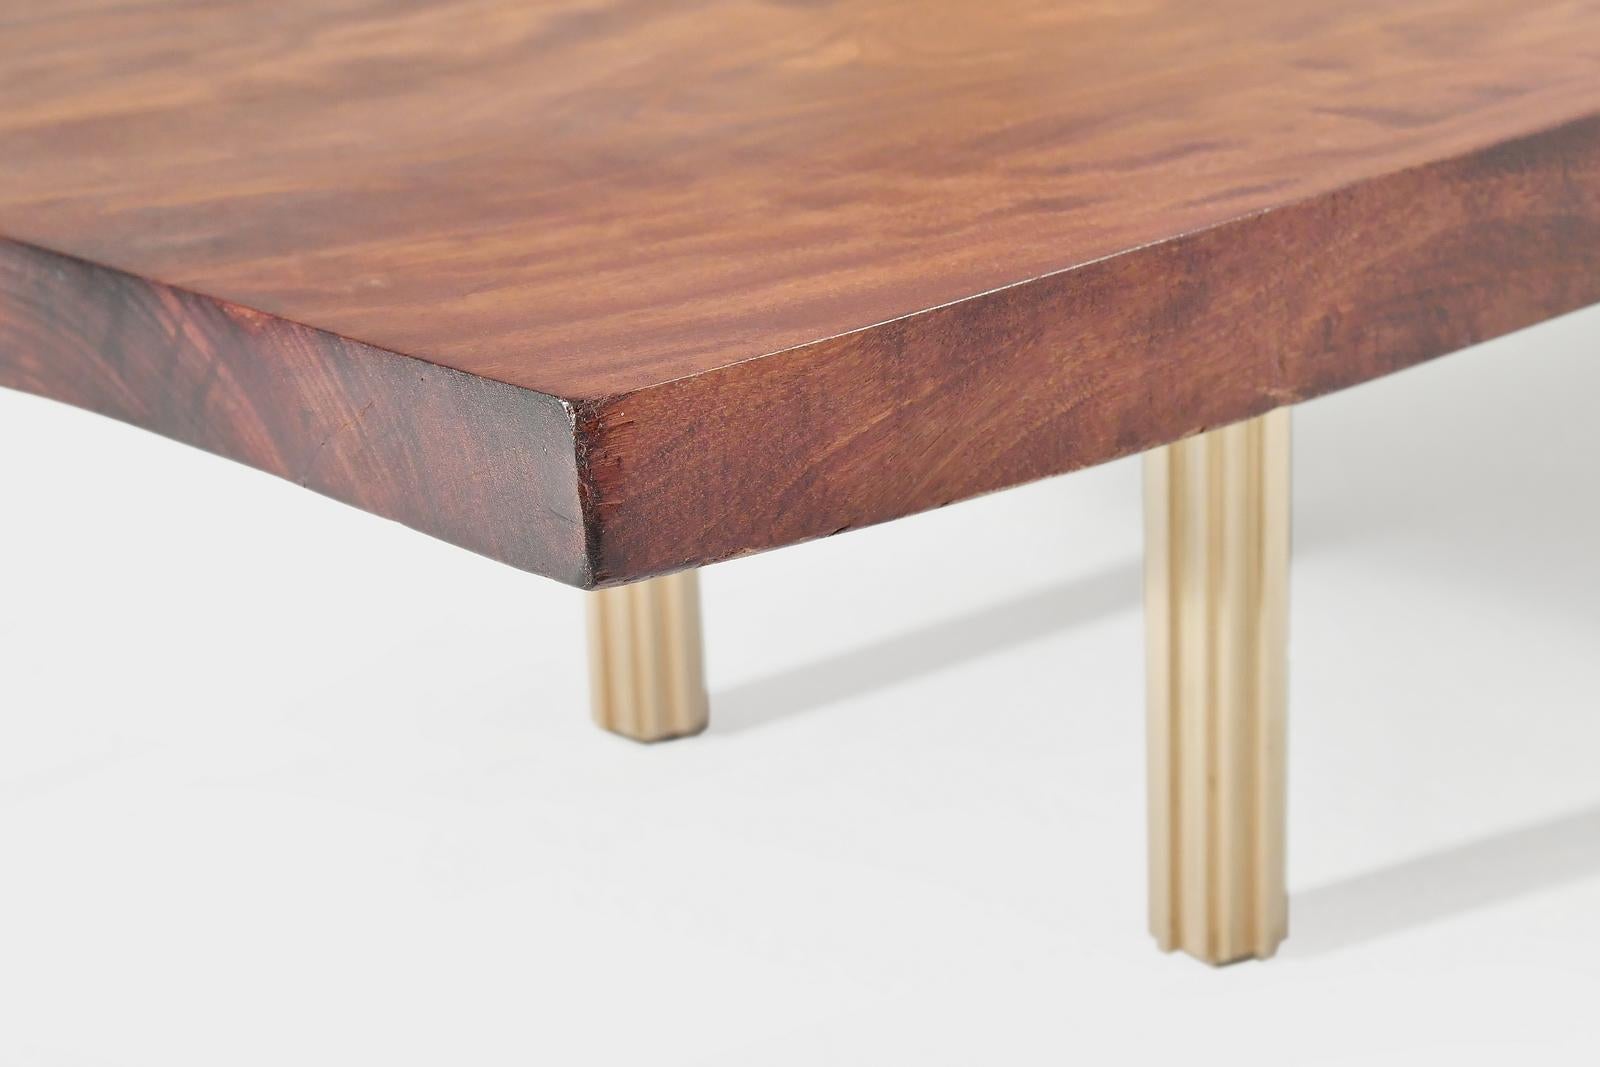 Thai Bespoke Coffee Table, Antique Hardwood Slab, and Brass Bases, by P. Tendercool For Sale